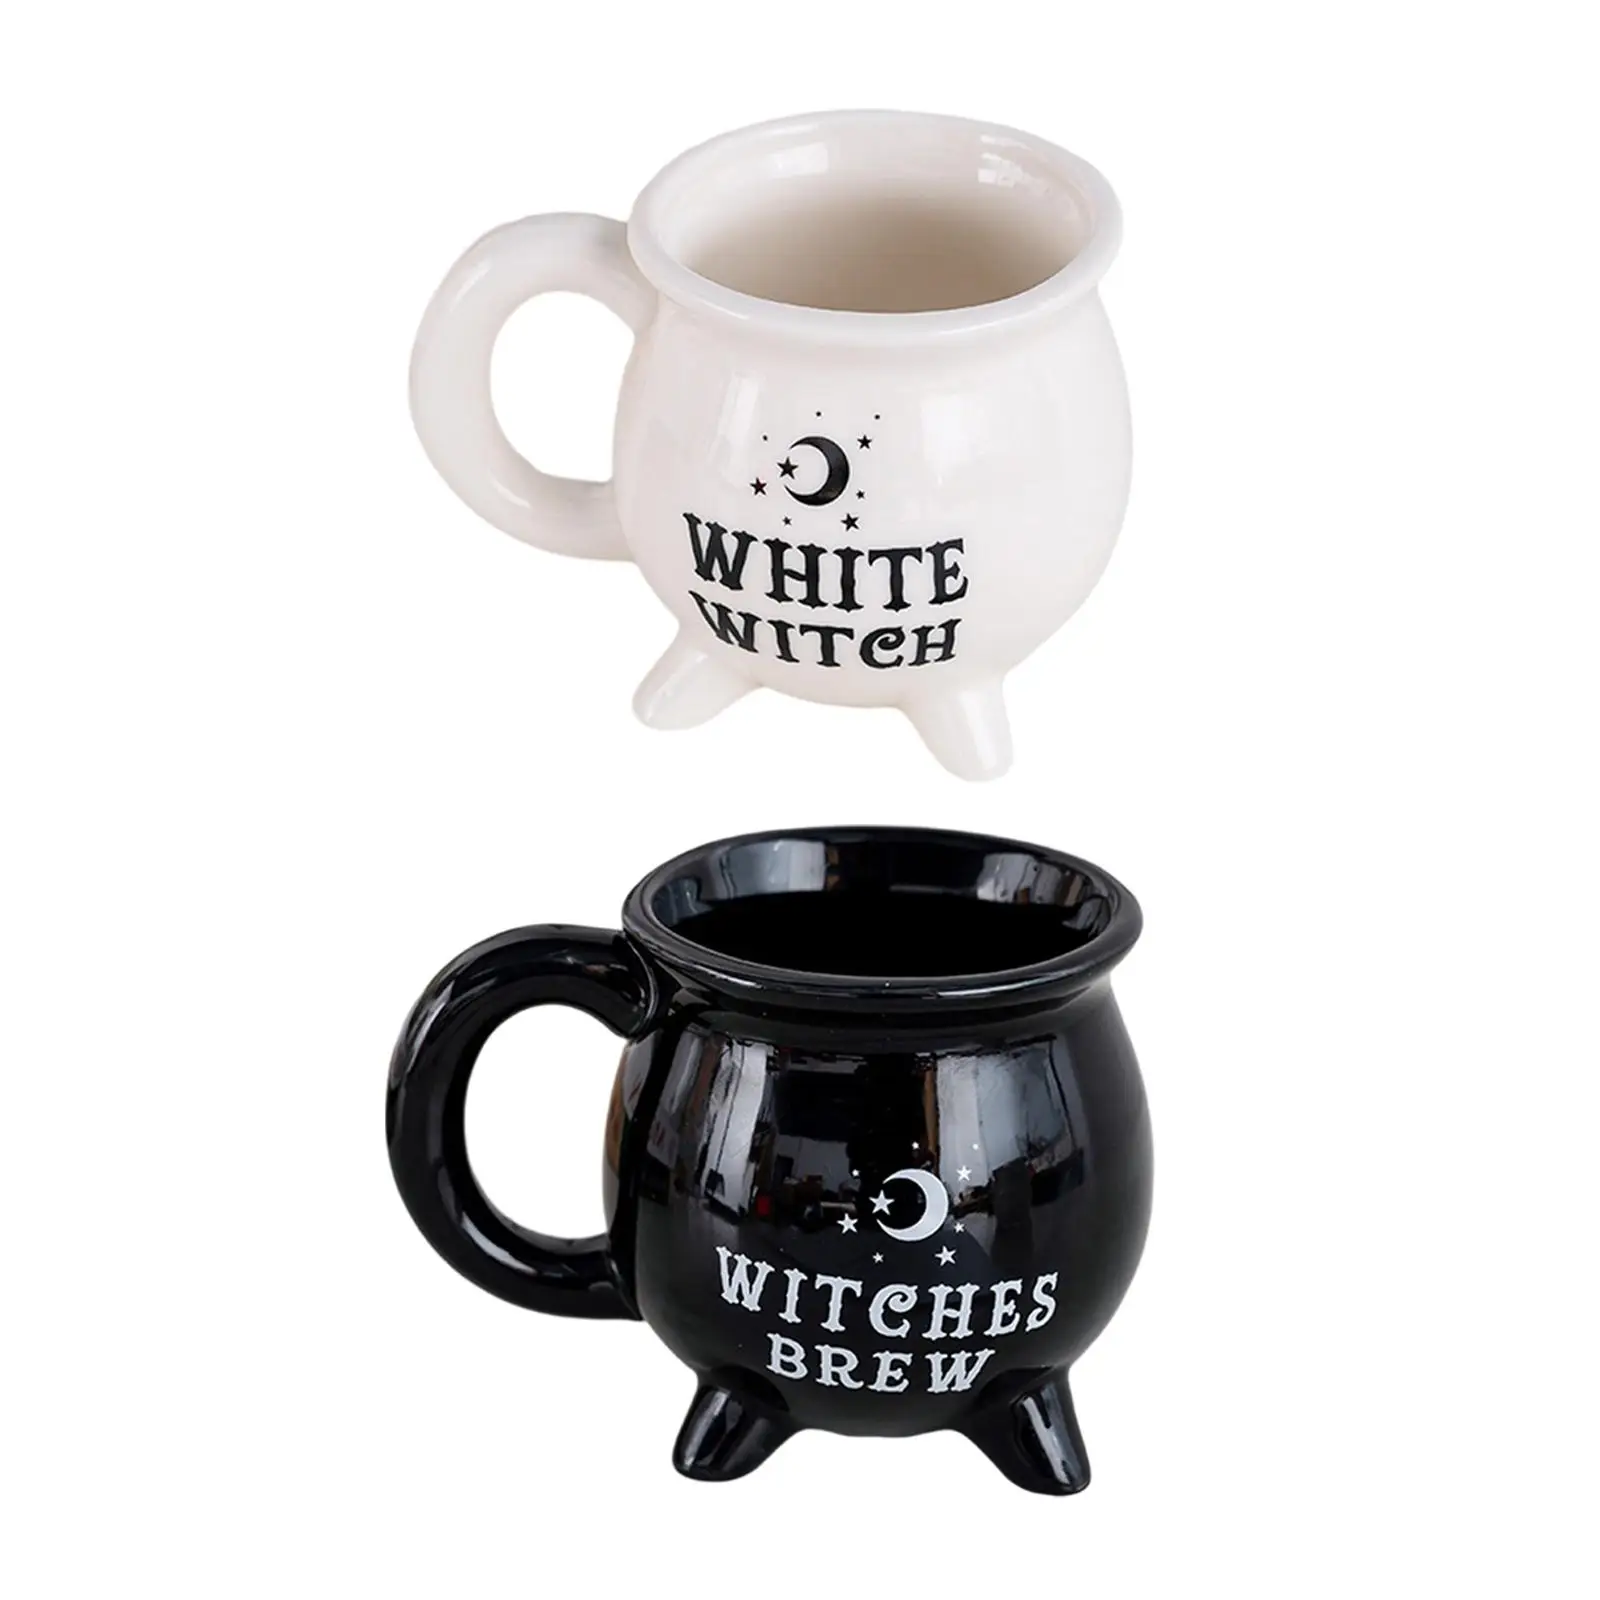 Halloween Coffee Mug Porcelain 3D Novelty Gothic Cup Witch Ceramic Mug for Candy Chocolate Halloween Milk